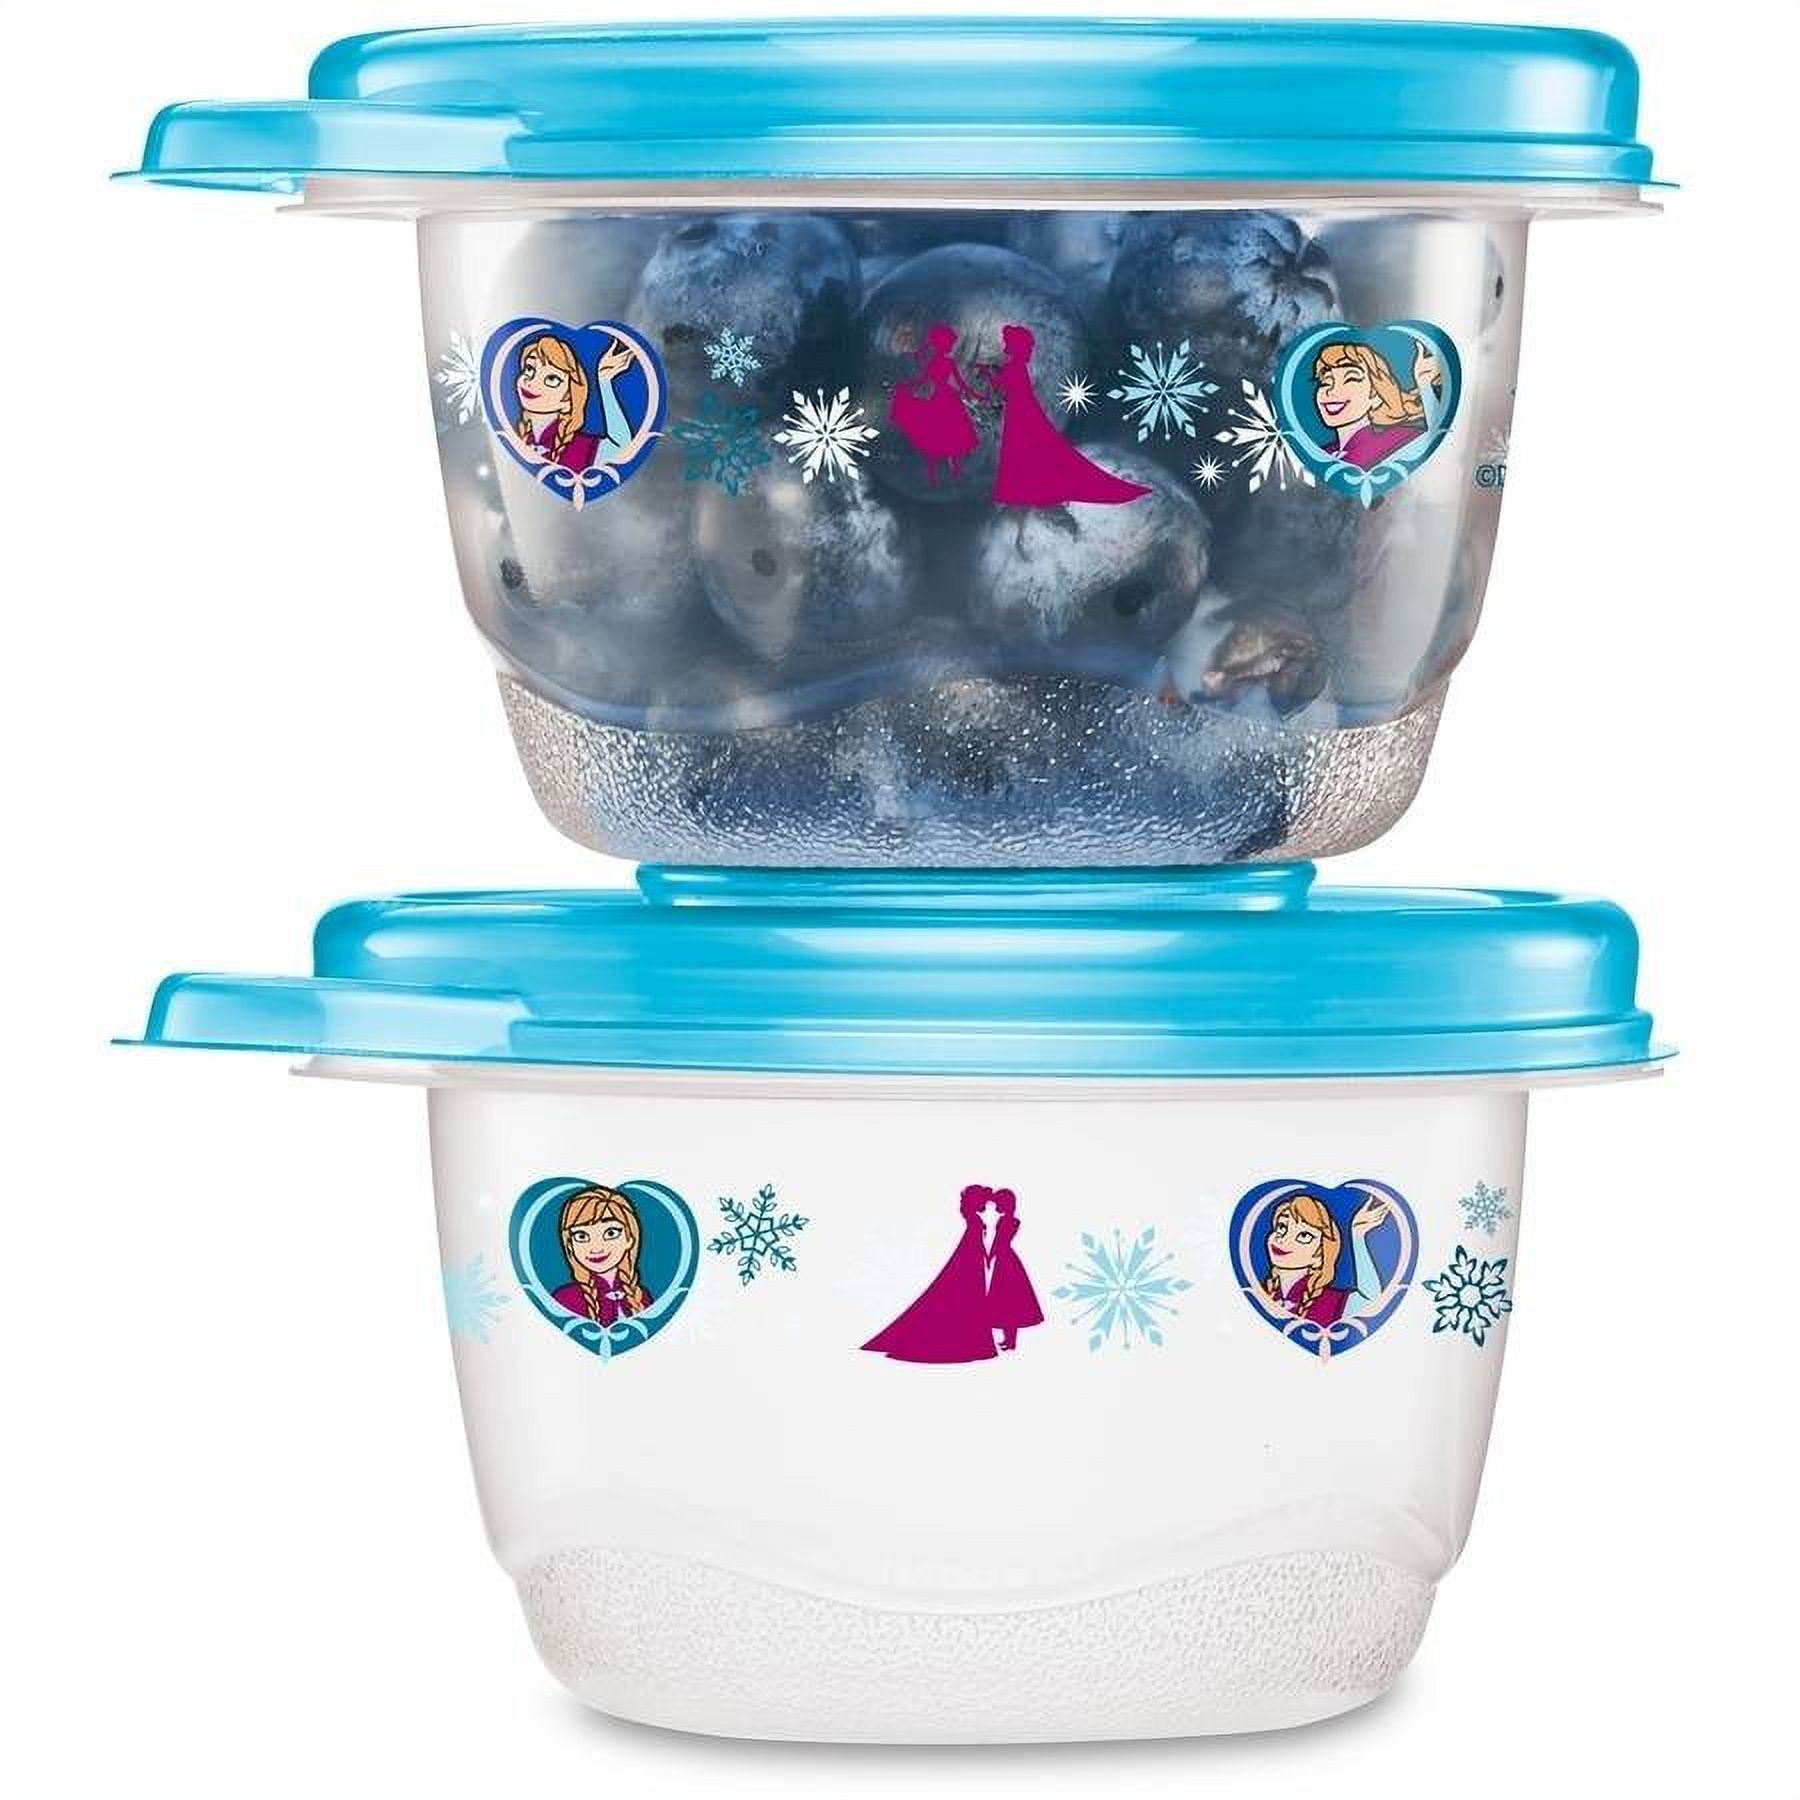 Glad Lunch Variety Pack Disney Frozen Food Storage Containers, BPA Free, 14 pk - image 4 of 8